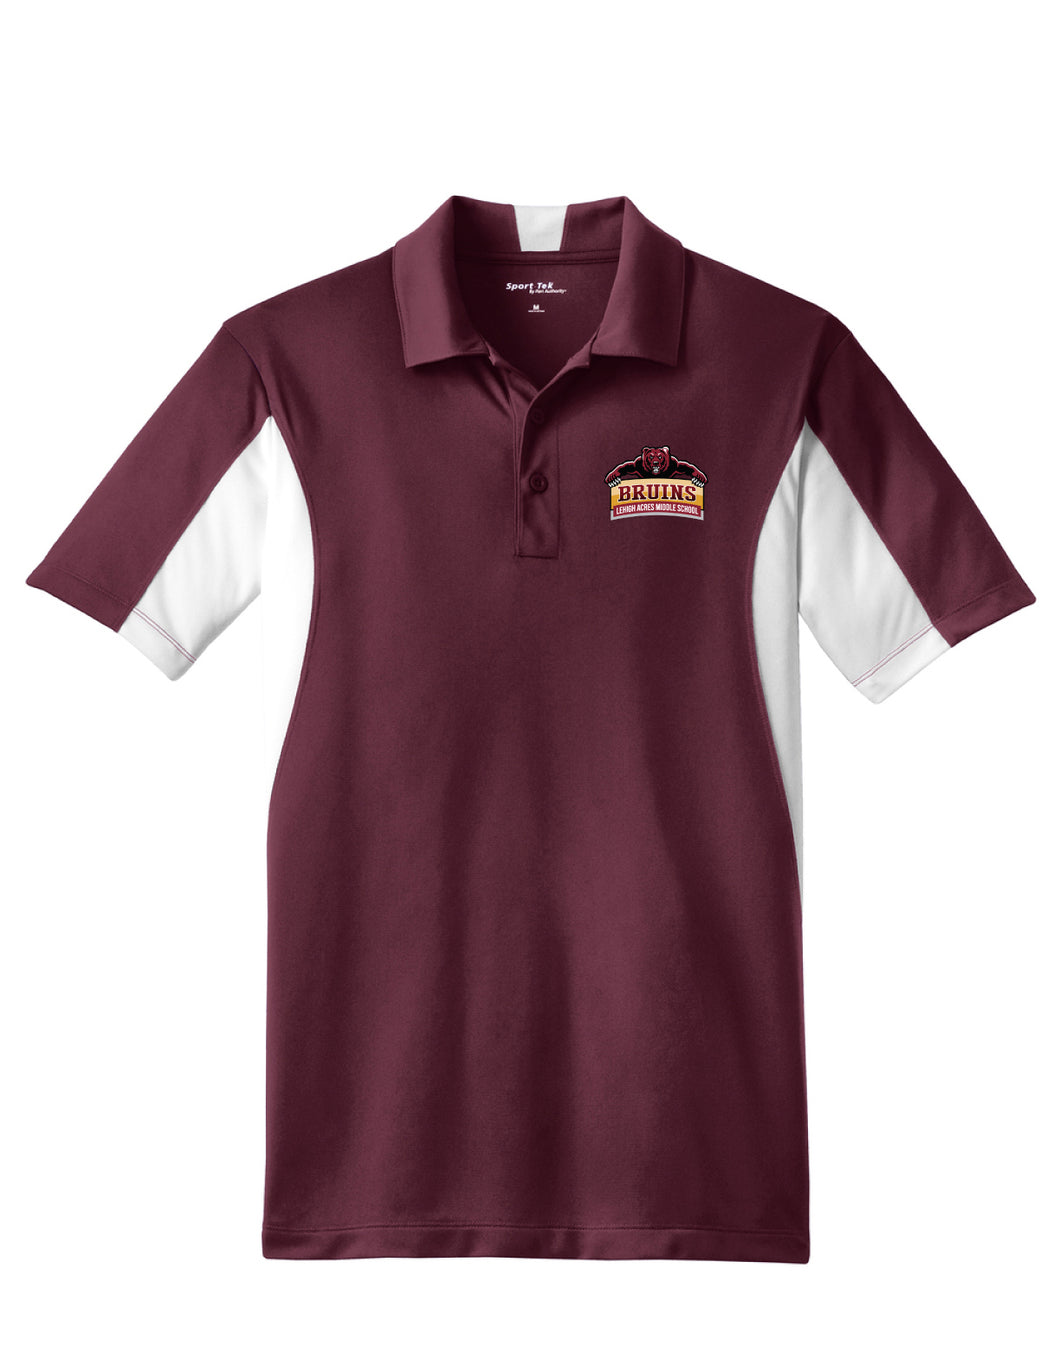 Polo Shirt Maroon with White Trim (Unisex Adult Cut)